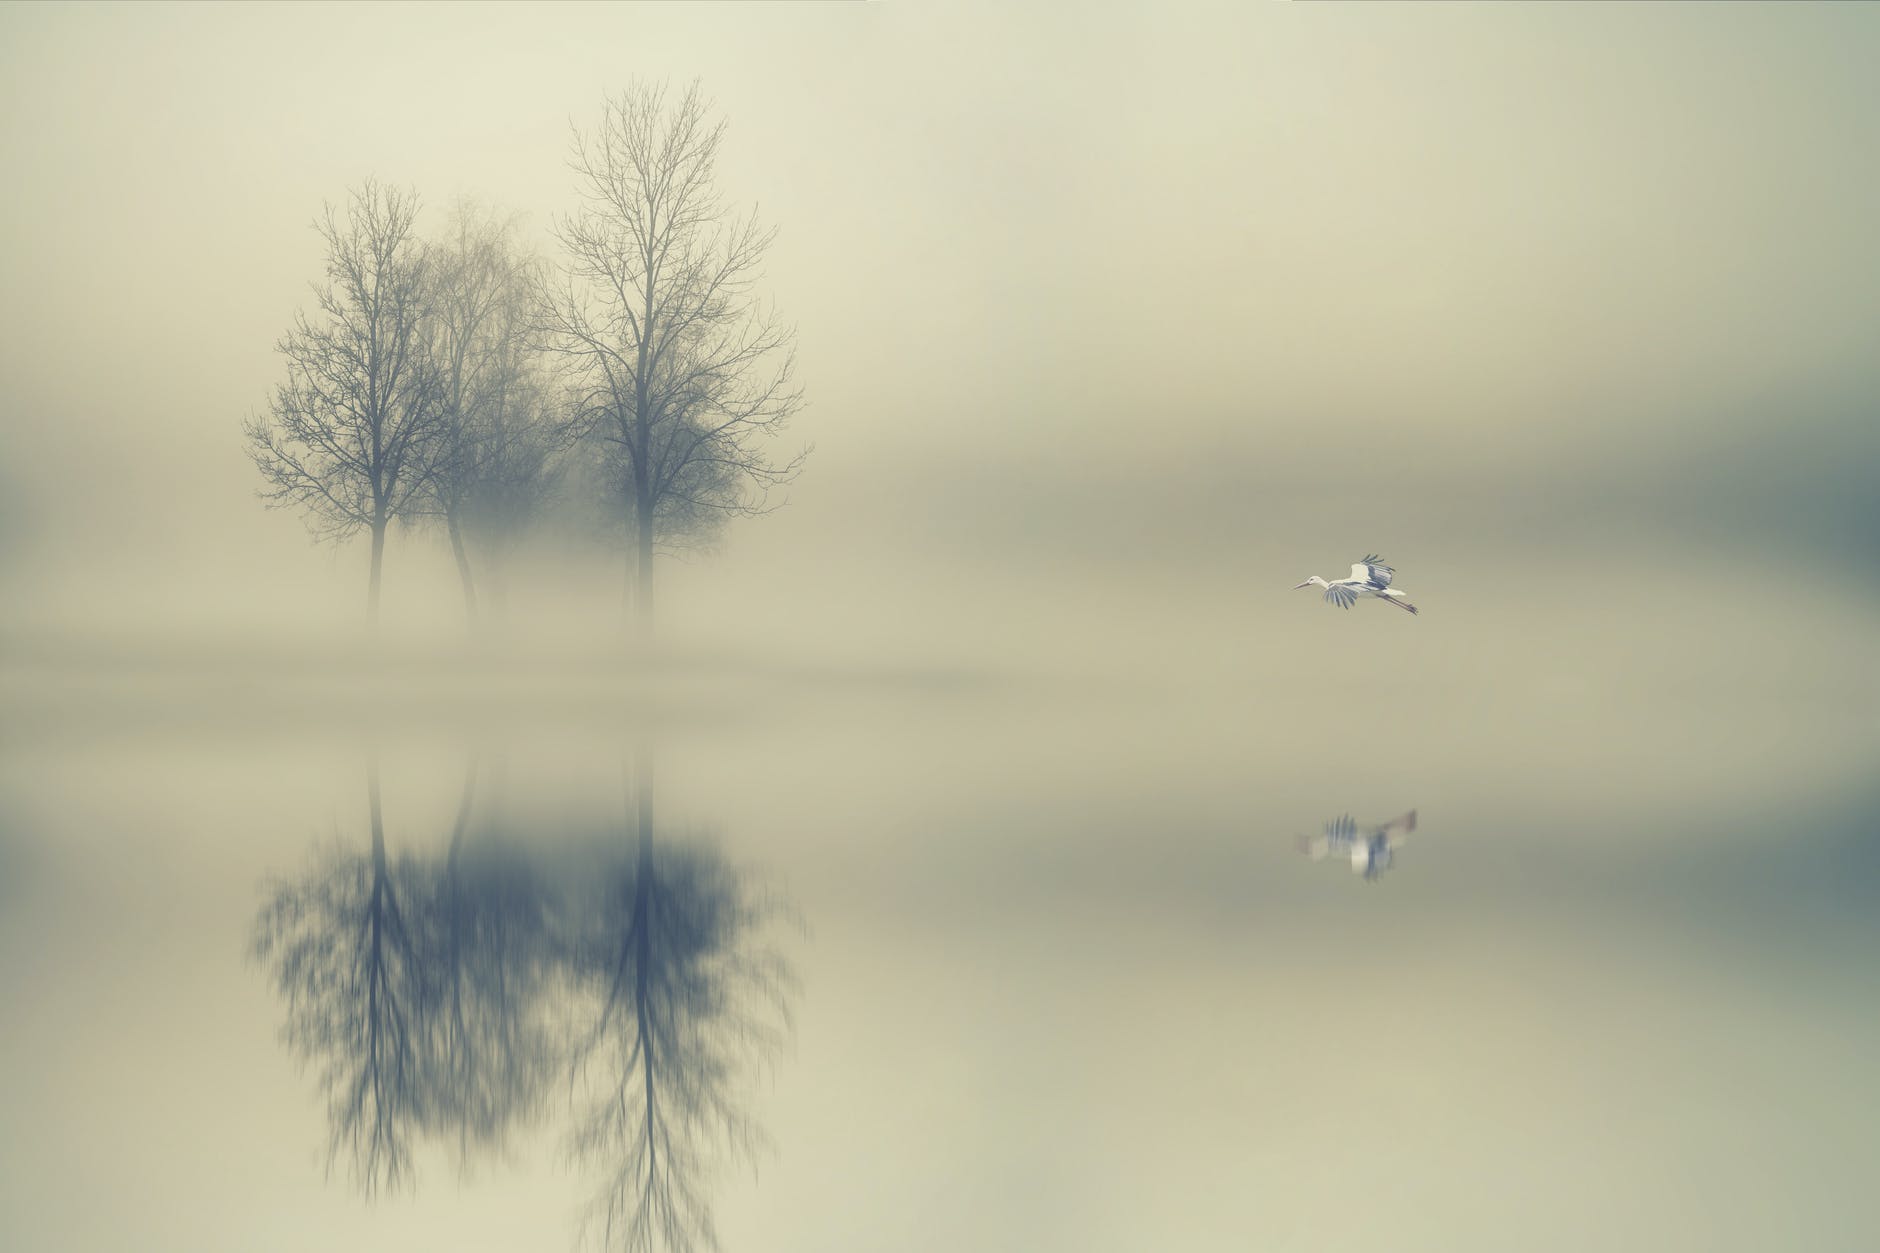 trees surrounded by water during foggy day